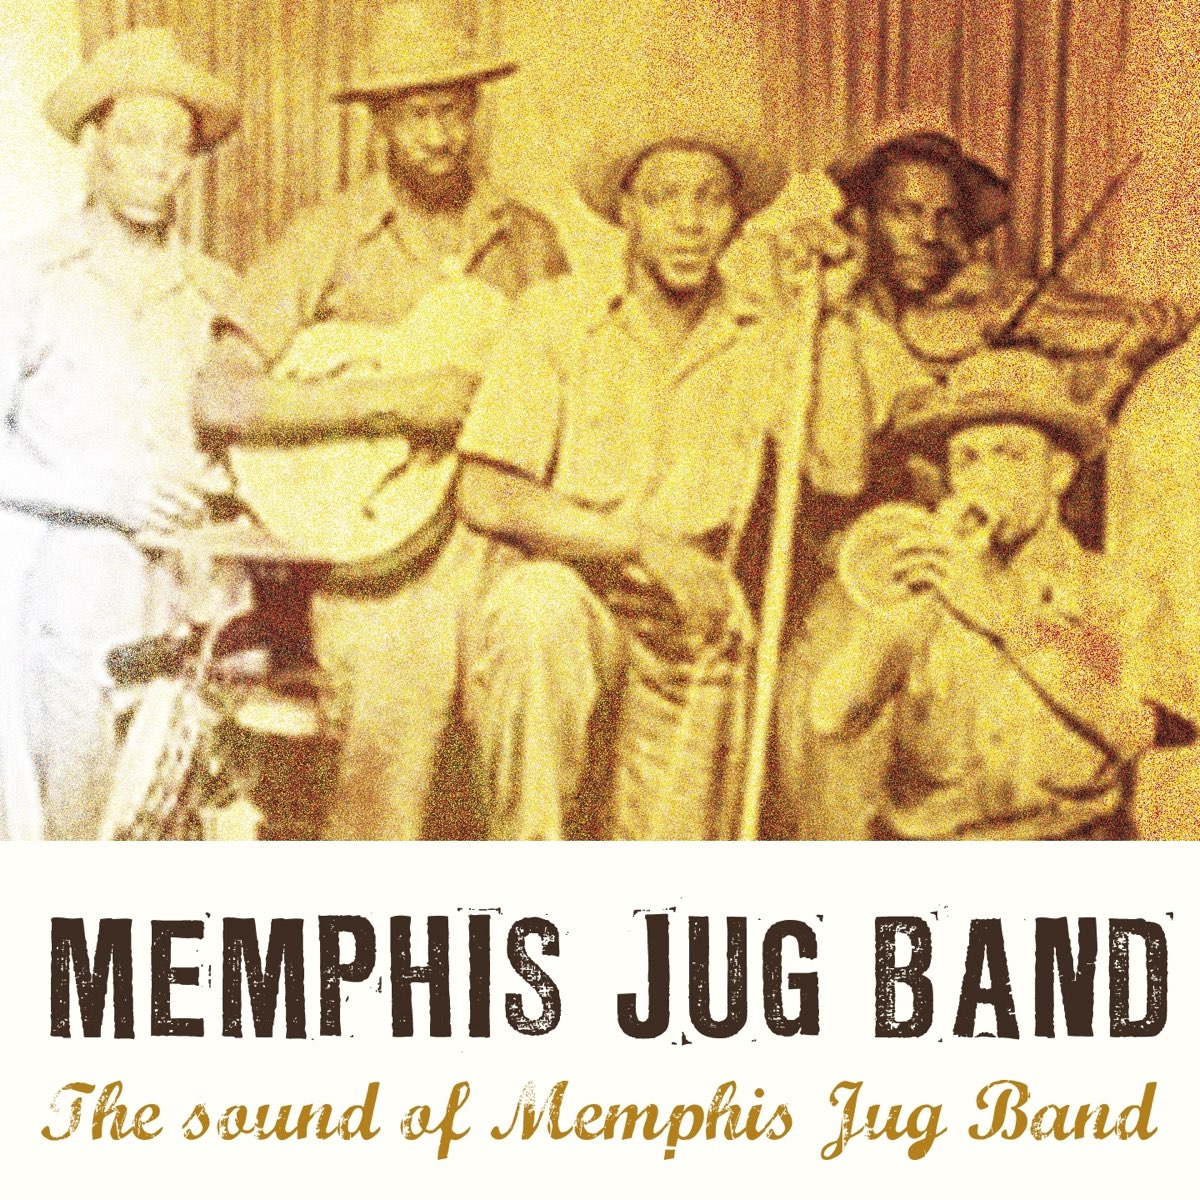 The Sound of Memphis Jug Band by Memphis Jug Band on Apple Music